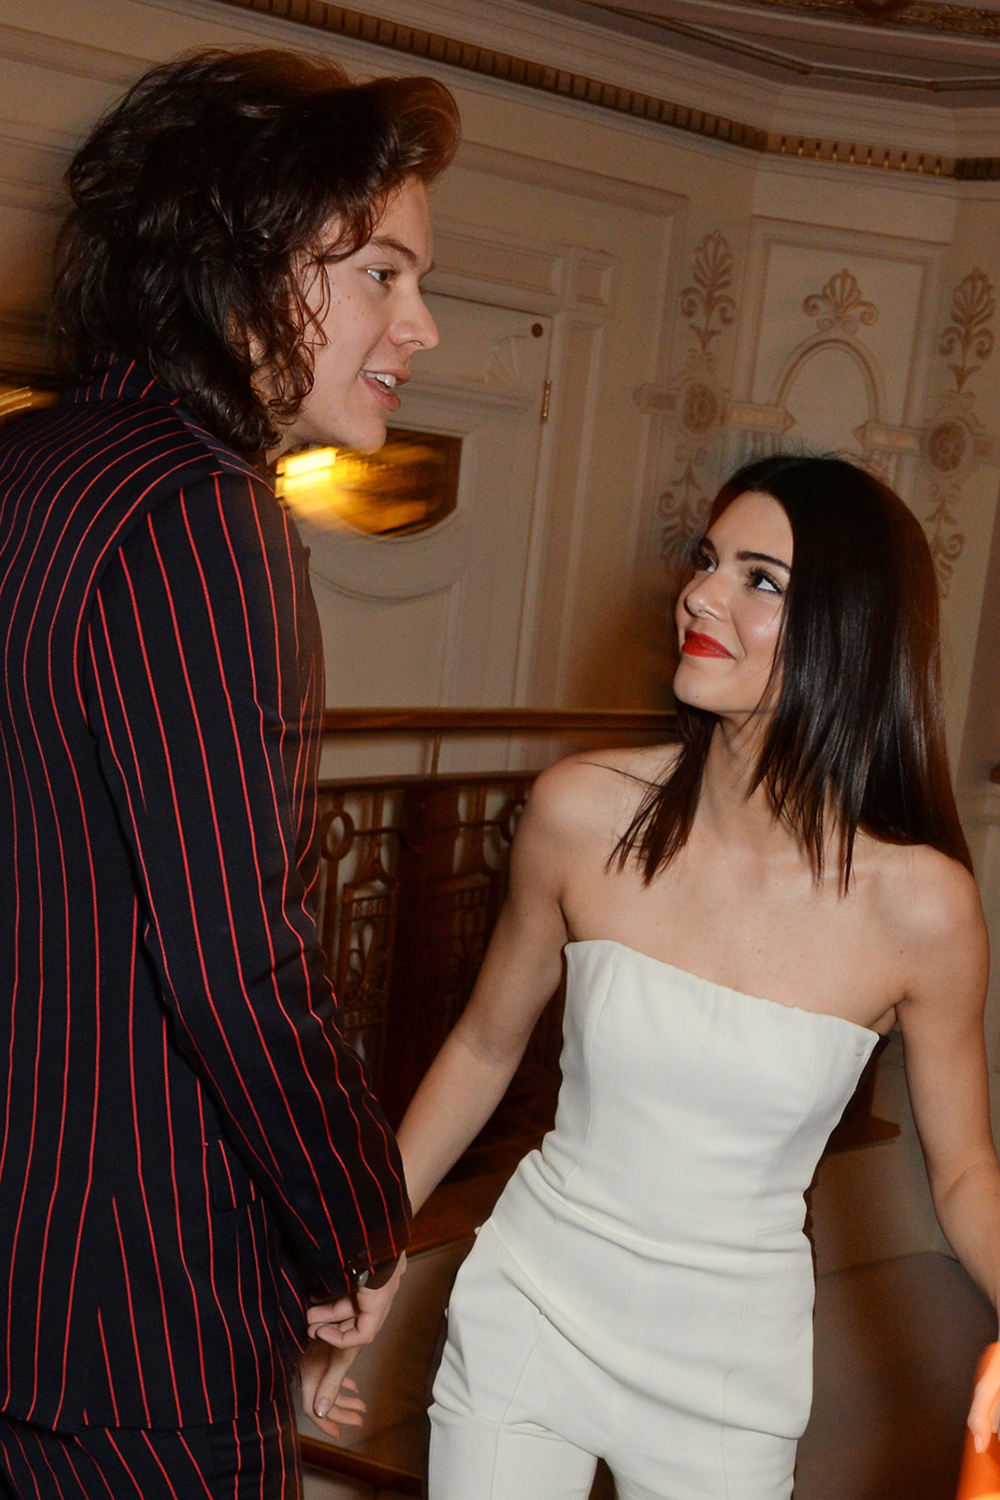 Harry Styles and Kendall Jenner enjoyed a brief fling in 2013 just as Kendall began her rise to supermodel stardom. The couple were spotted holidaying in the Caribbean over the new year, however, the fleeting romance didn't seem to last. But it look's like third times a charm for the model and musician who have reportedly started dating again after being spotted out and about together in LA. read less